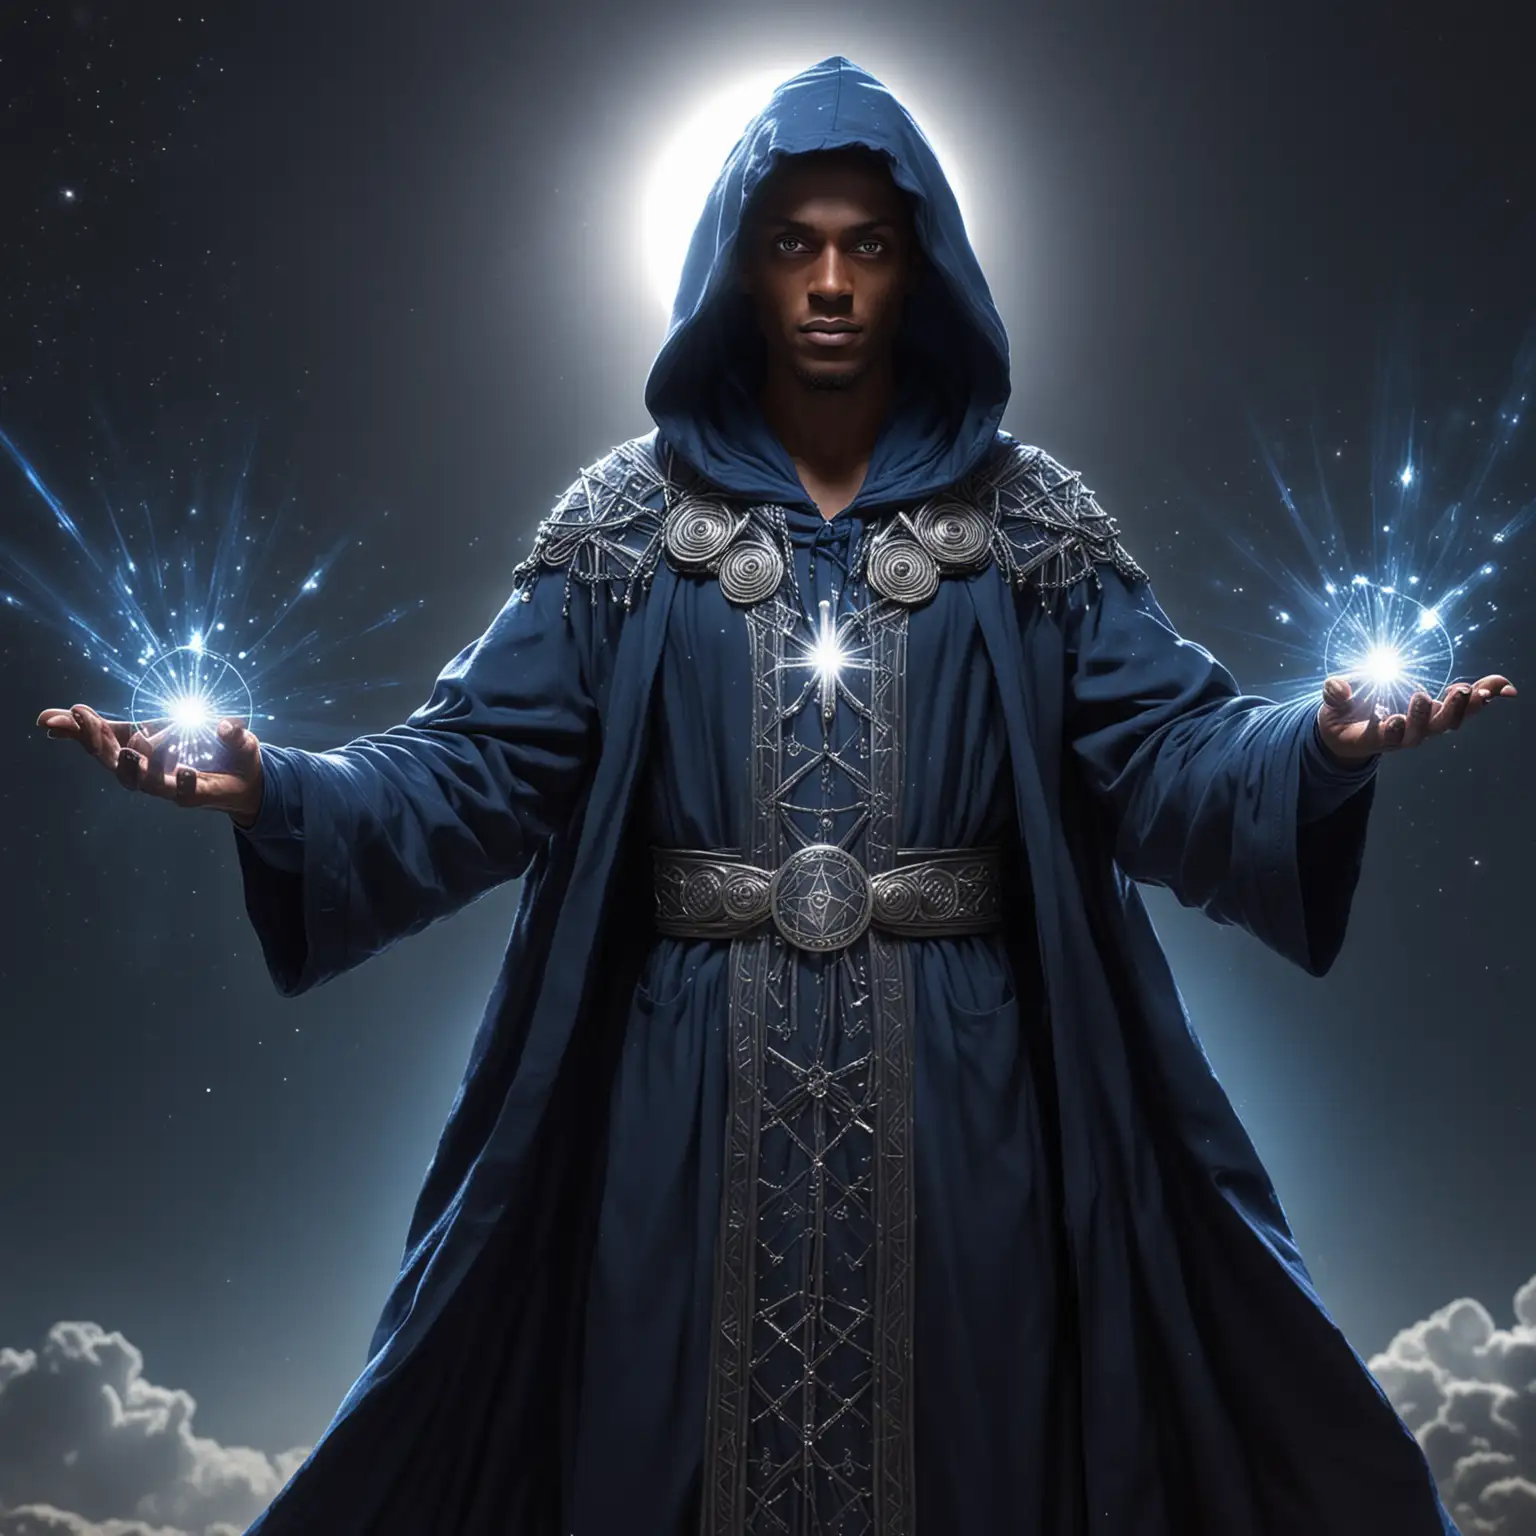 Tall dark skinned galatic being with light blue eyes, dressed in a dark blue hooded wizard robe with silver geometric symbols on it,  standing with arms outreached with celestial bright lights and sun behind it.